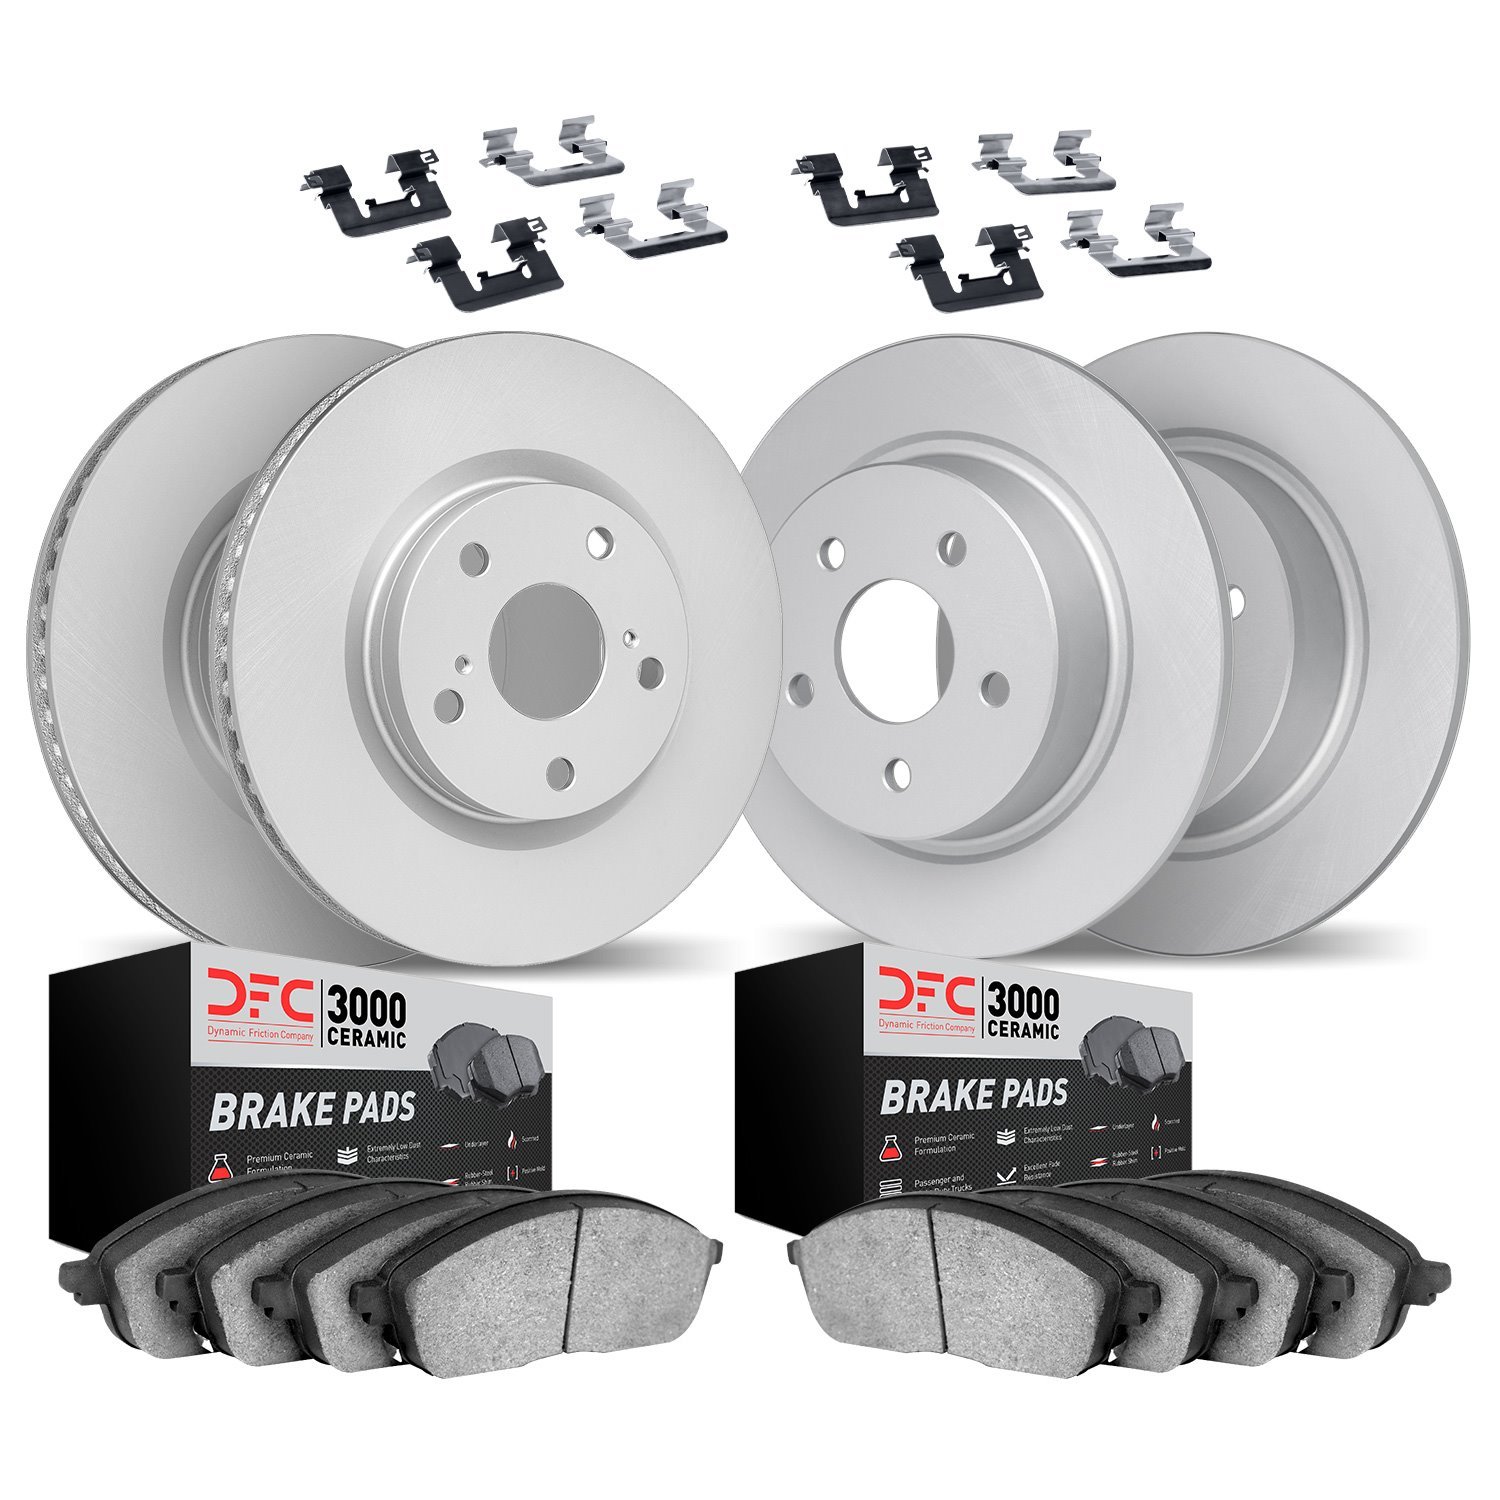 4314-32009 Geospec Brake Rotors with 3000-Series Ceramic Brake Pads & Hardware, Fits Select Mini, Position: Front and Rear